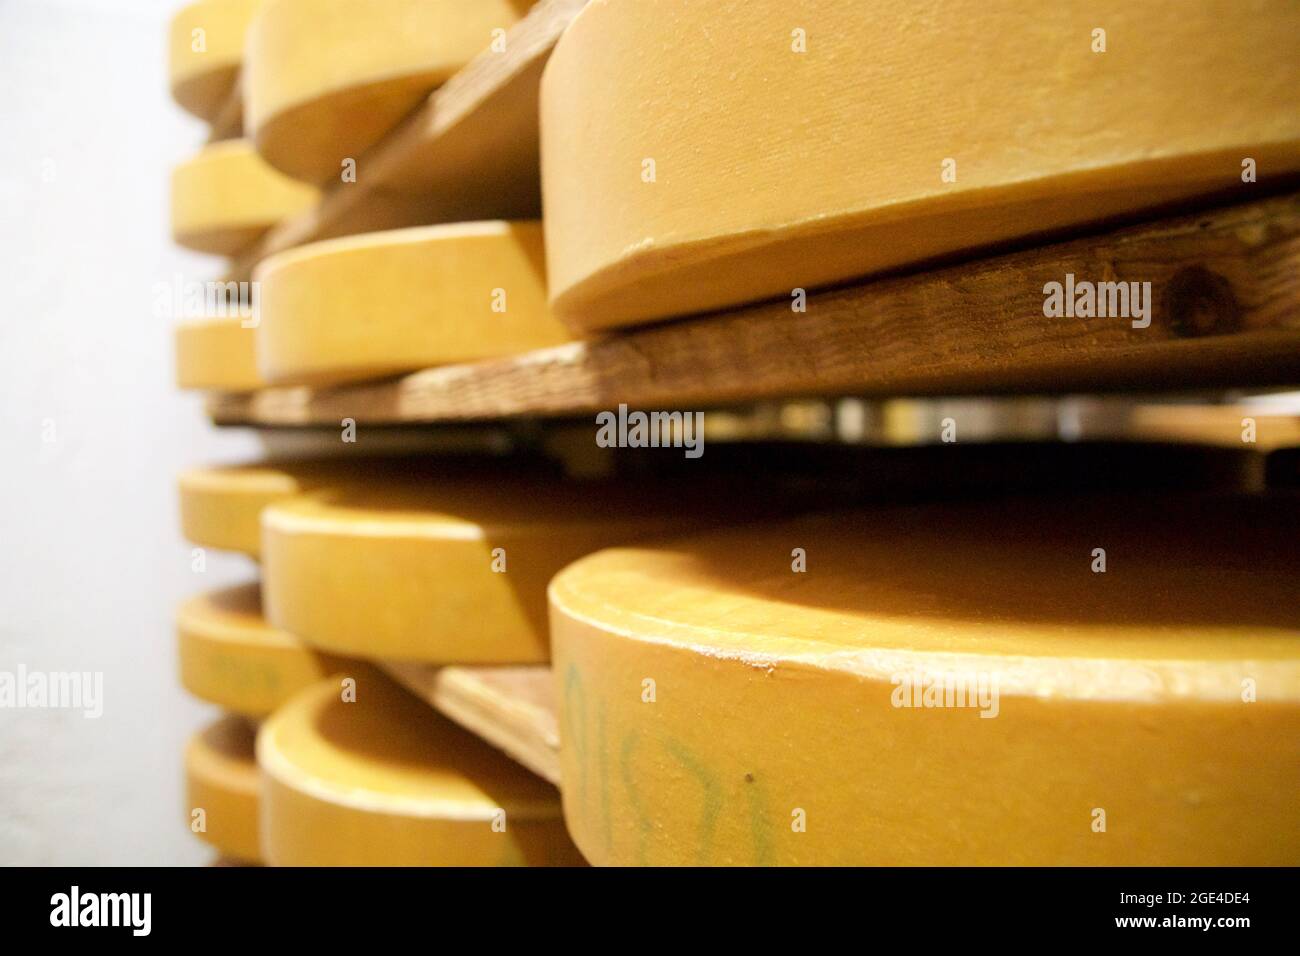 OBERSTAUFEN, GERMANY - 29 DEZ 2019: Cheese dairy warehouse with shelves stacked with rows of cheese Stock Photo